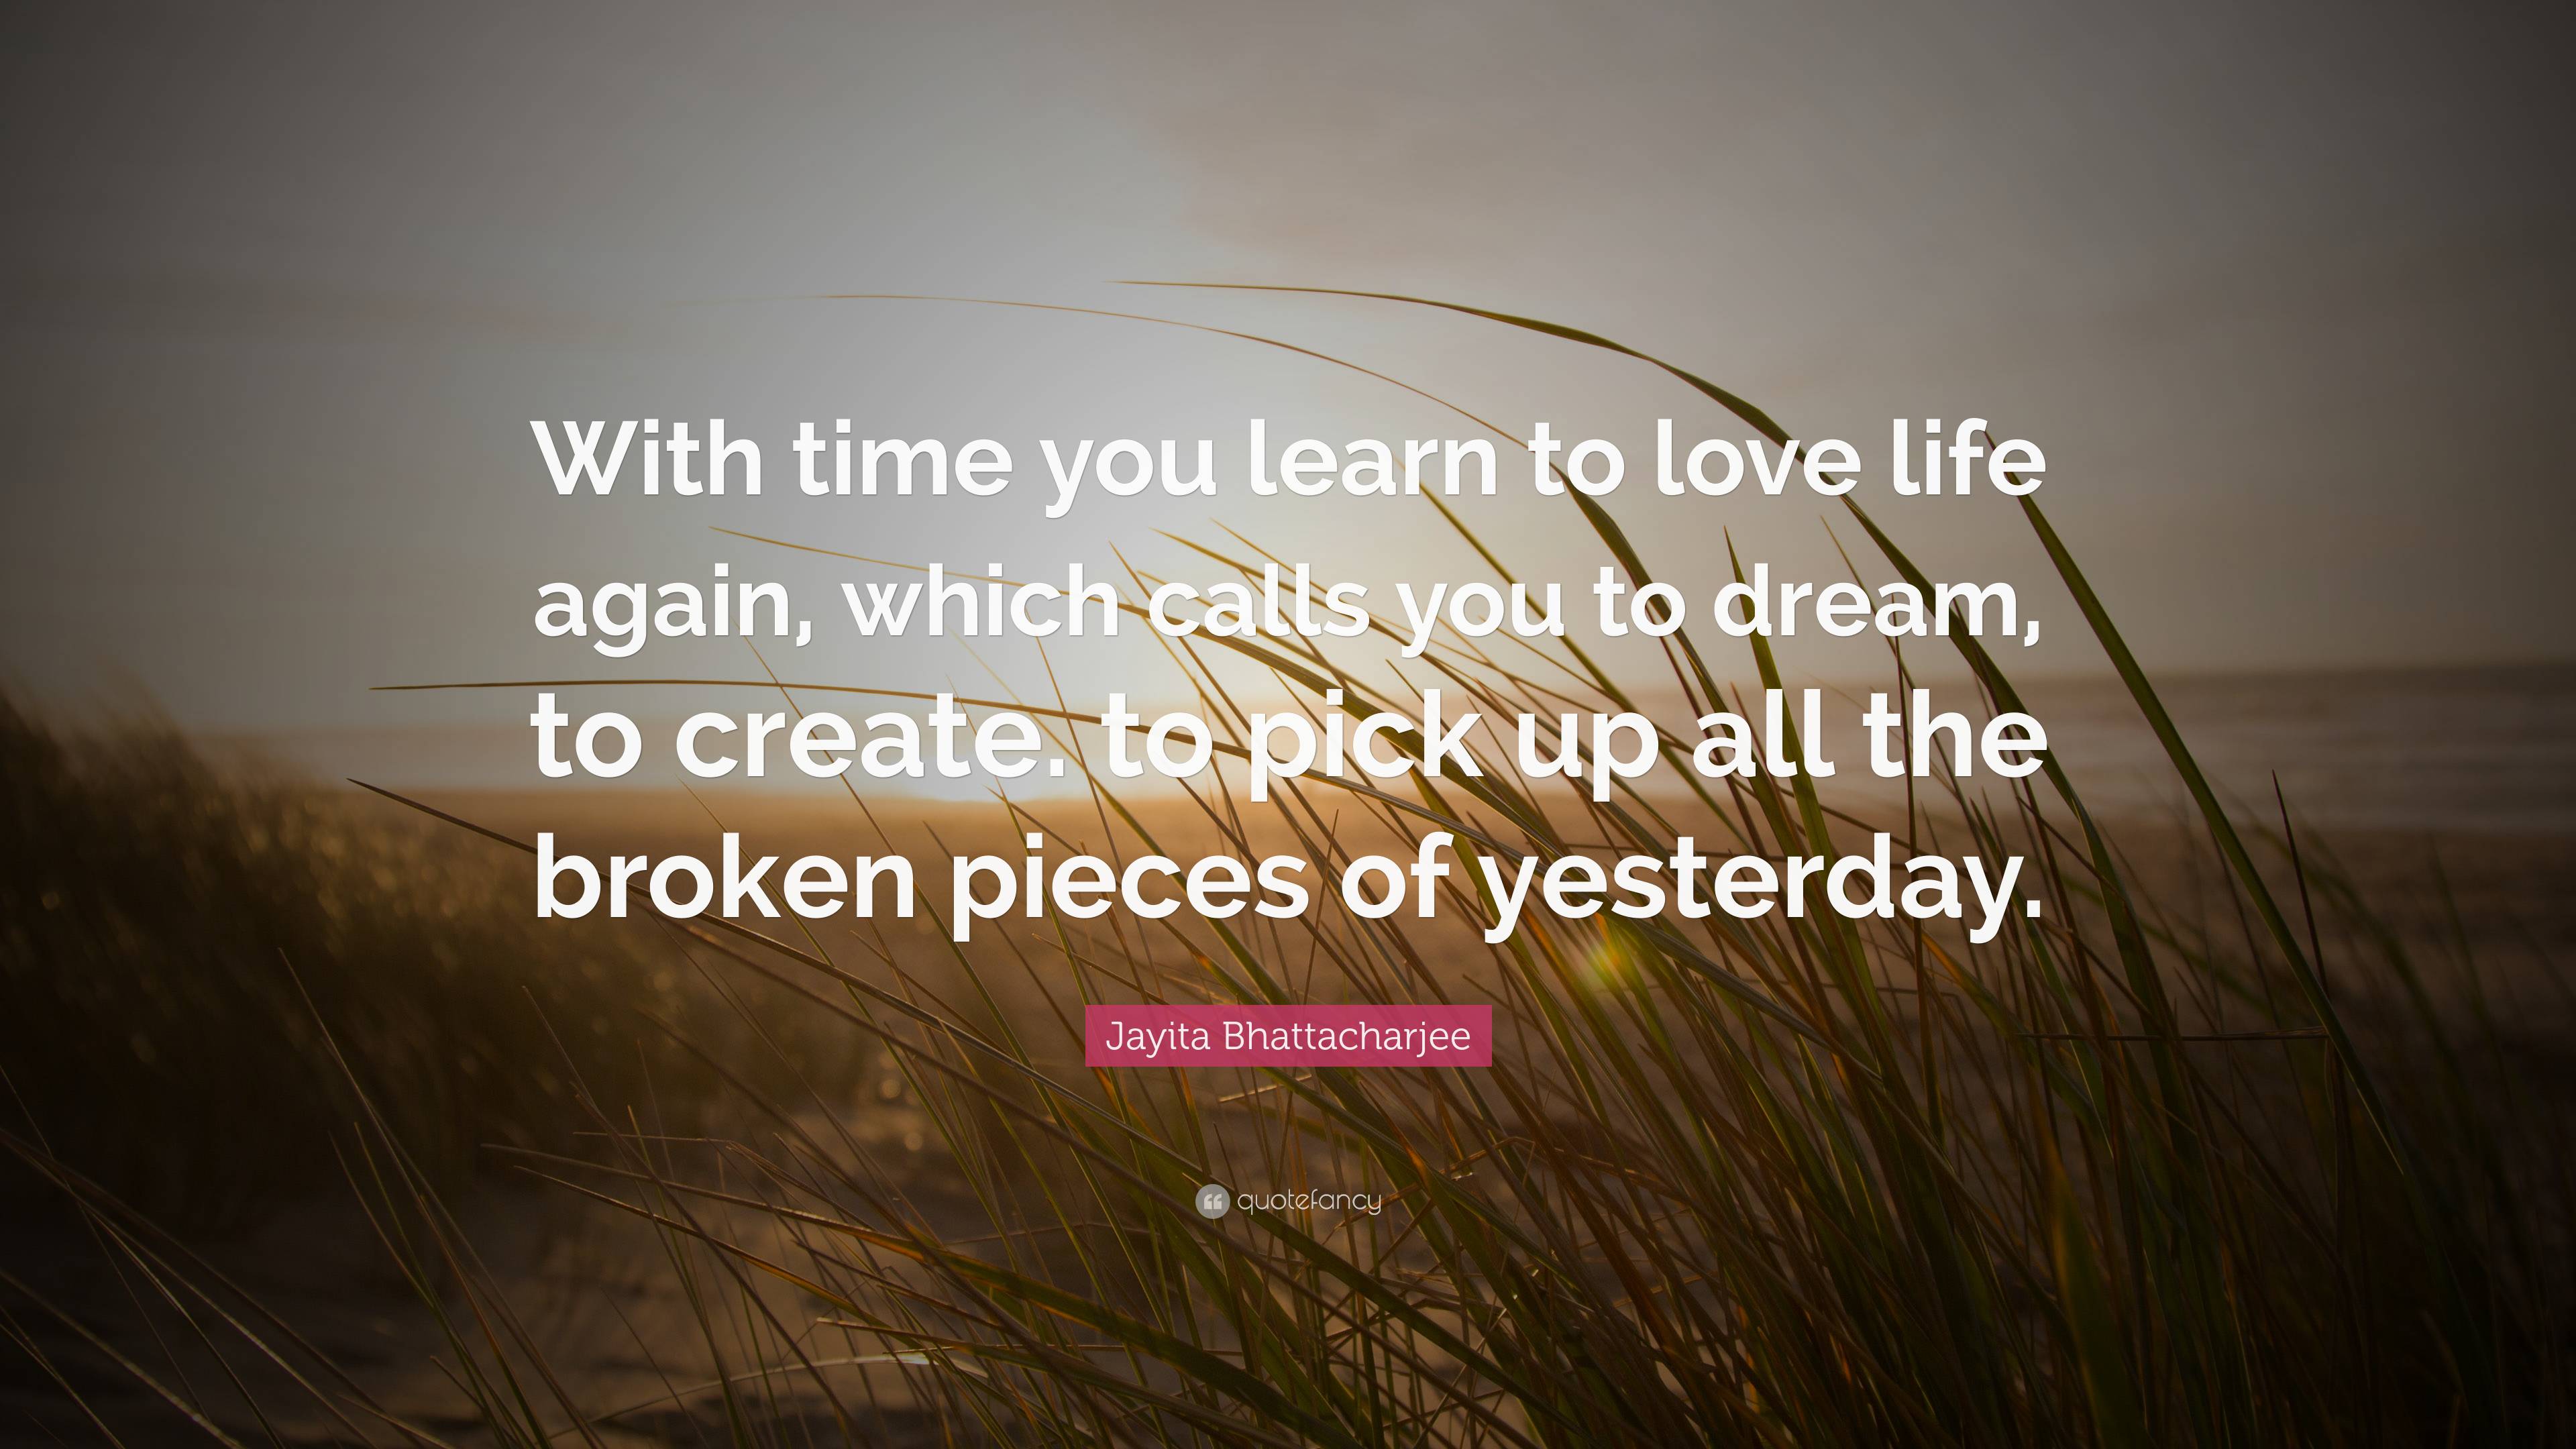 Jayita Bhattacharjee Quote: “With time you learn to love life again ...